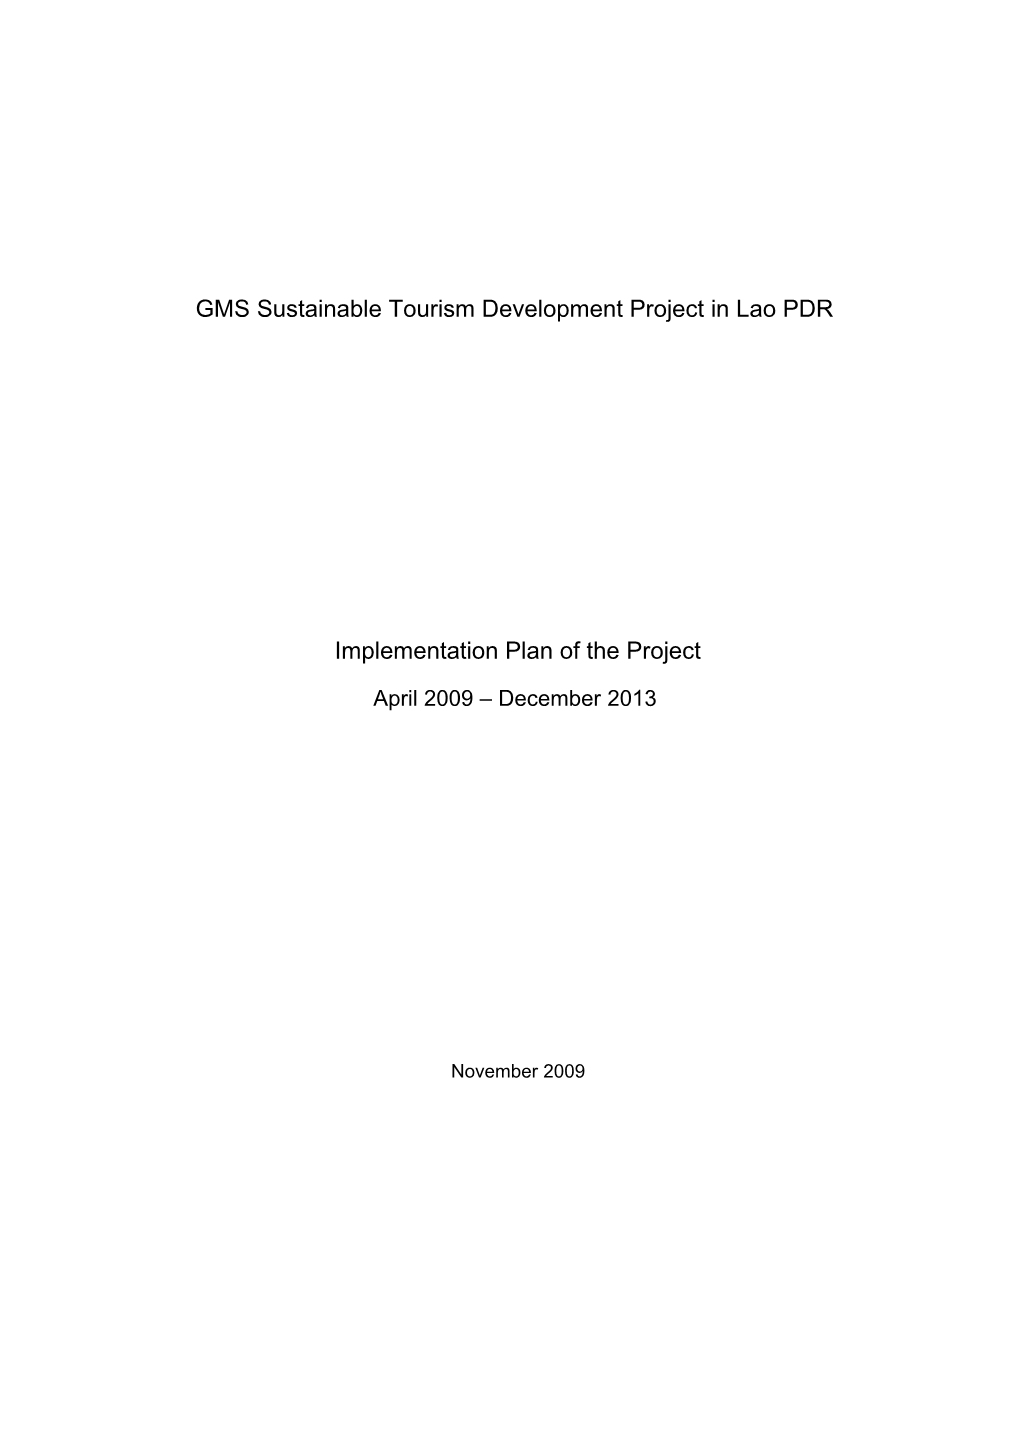 GMS Sustainable Tourism Development Project in Lao PDR